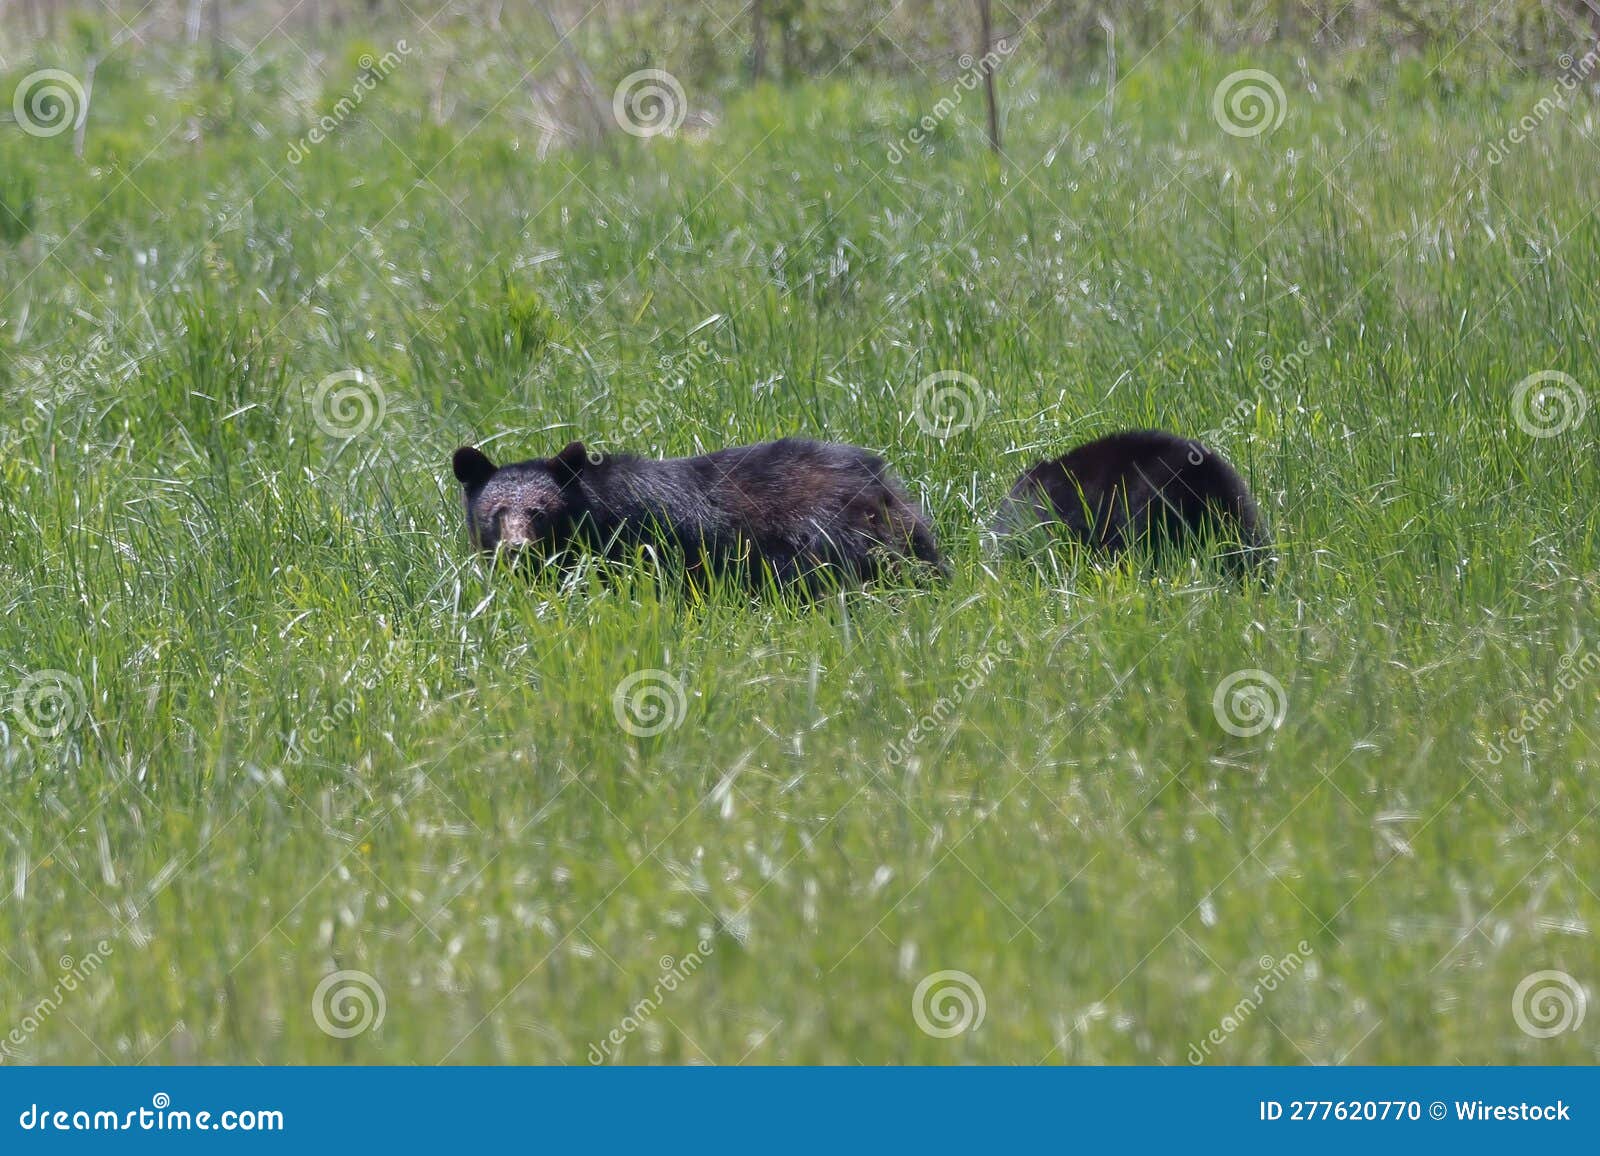 Wild Black Bears at Cades Cove in the Great Smokey Mountains National ...